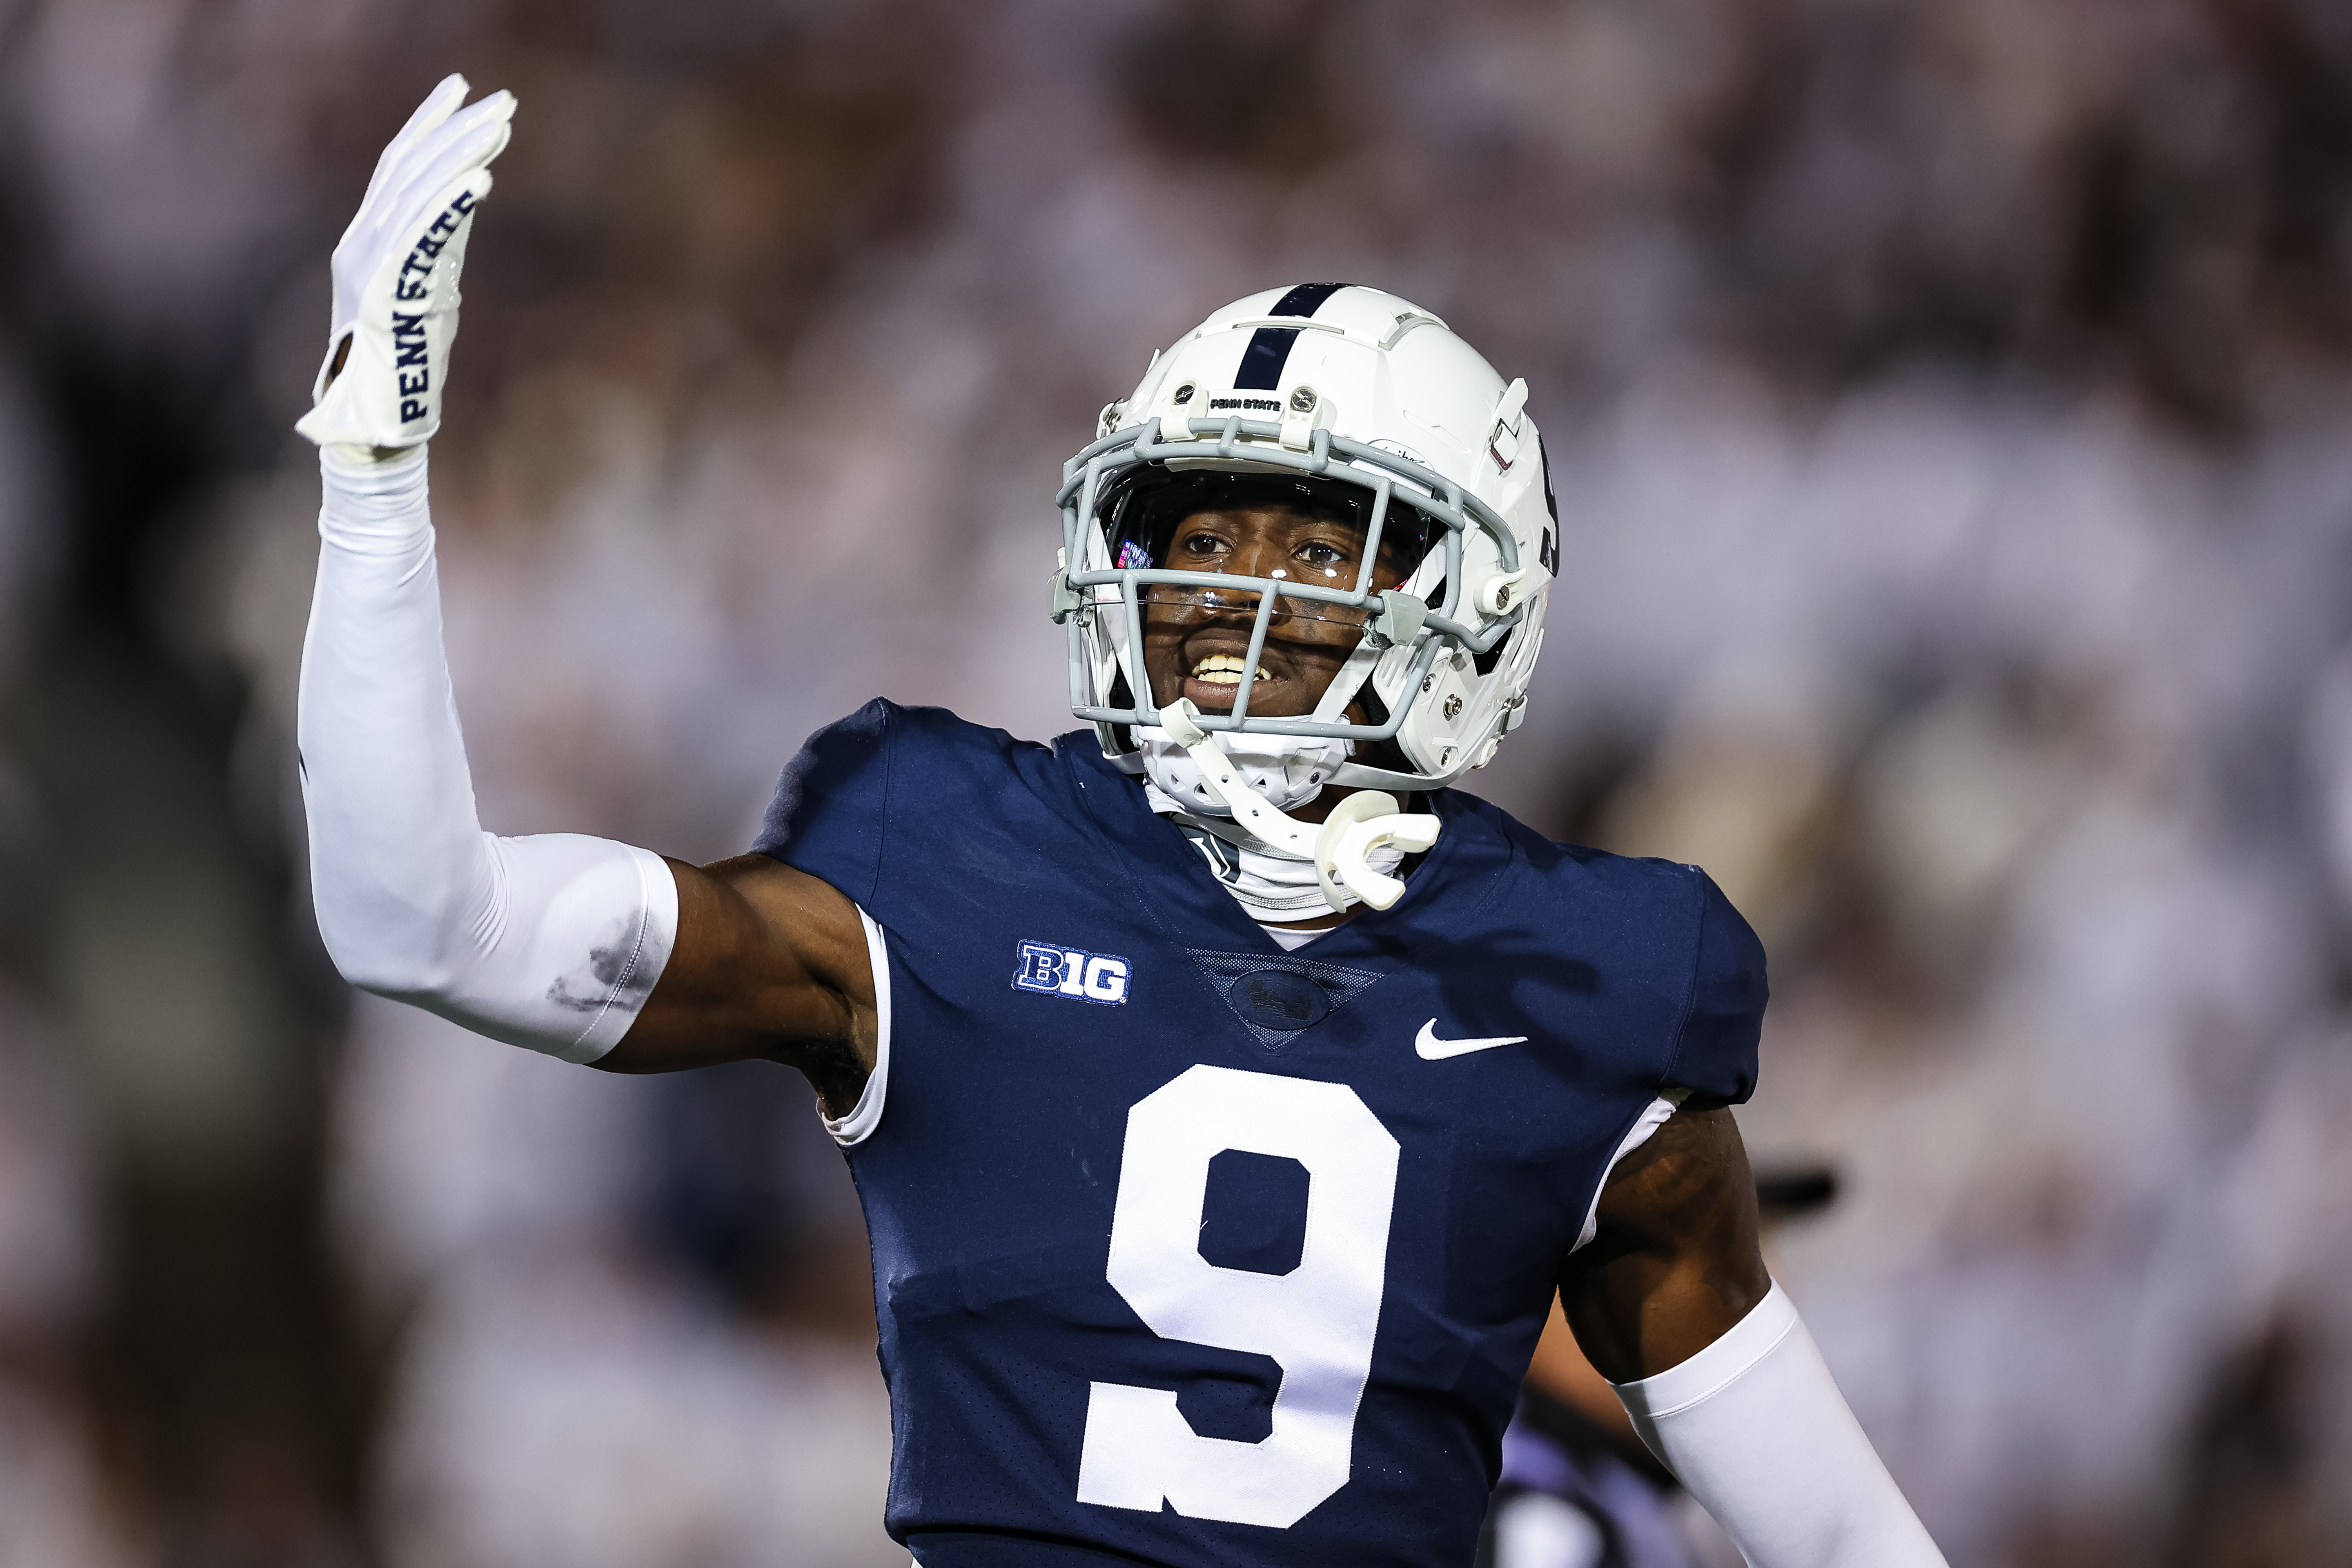 Joey Porter Jr. #9 of the Penn State Nittany Lions celebrates after a play against the Minnesota Golden Gophers during the first half at Beaver Stadium on October 22, 2022 in State College, Pennsylvania.